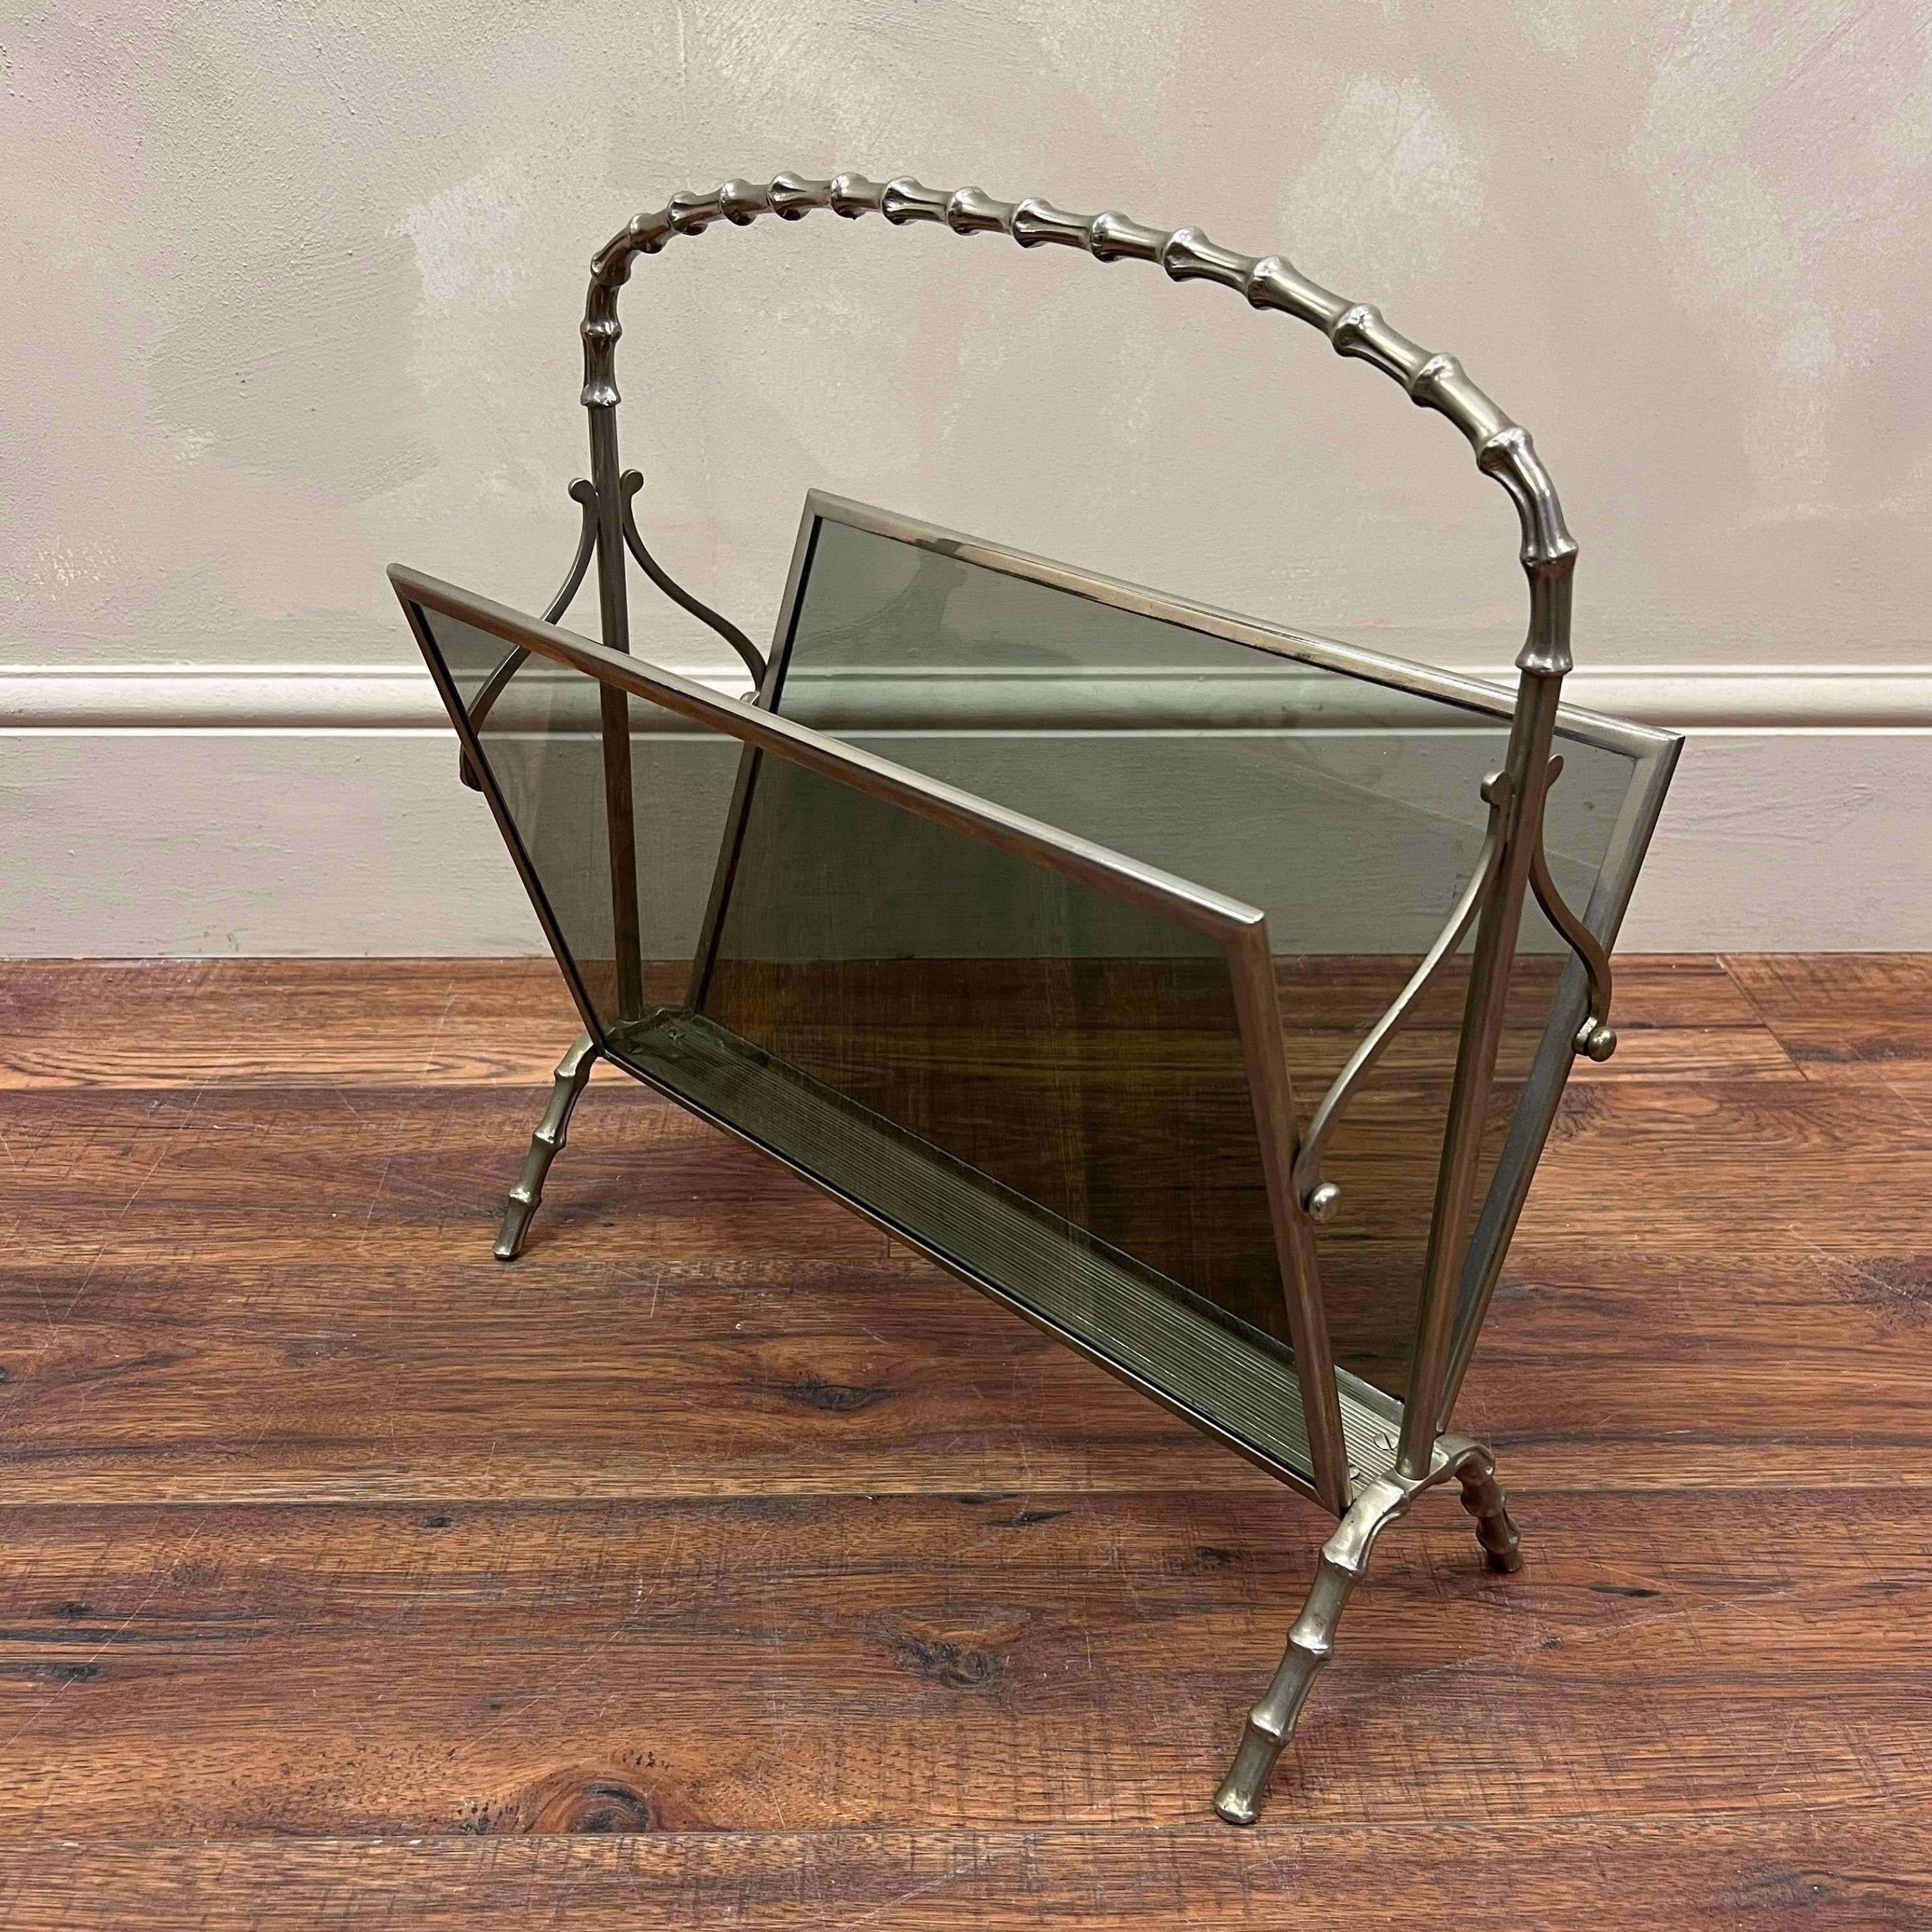 A faux bamboo magazine rack by Maison Baguès .
Original smoked glass sides in a polished chrome frame.
A very stylish and rare example. 

France, circa 1940.

Height - 47 cm
width  - 44.5 cm
Depth - 21 cm 

We are happy to work with you with your